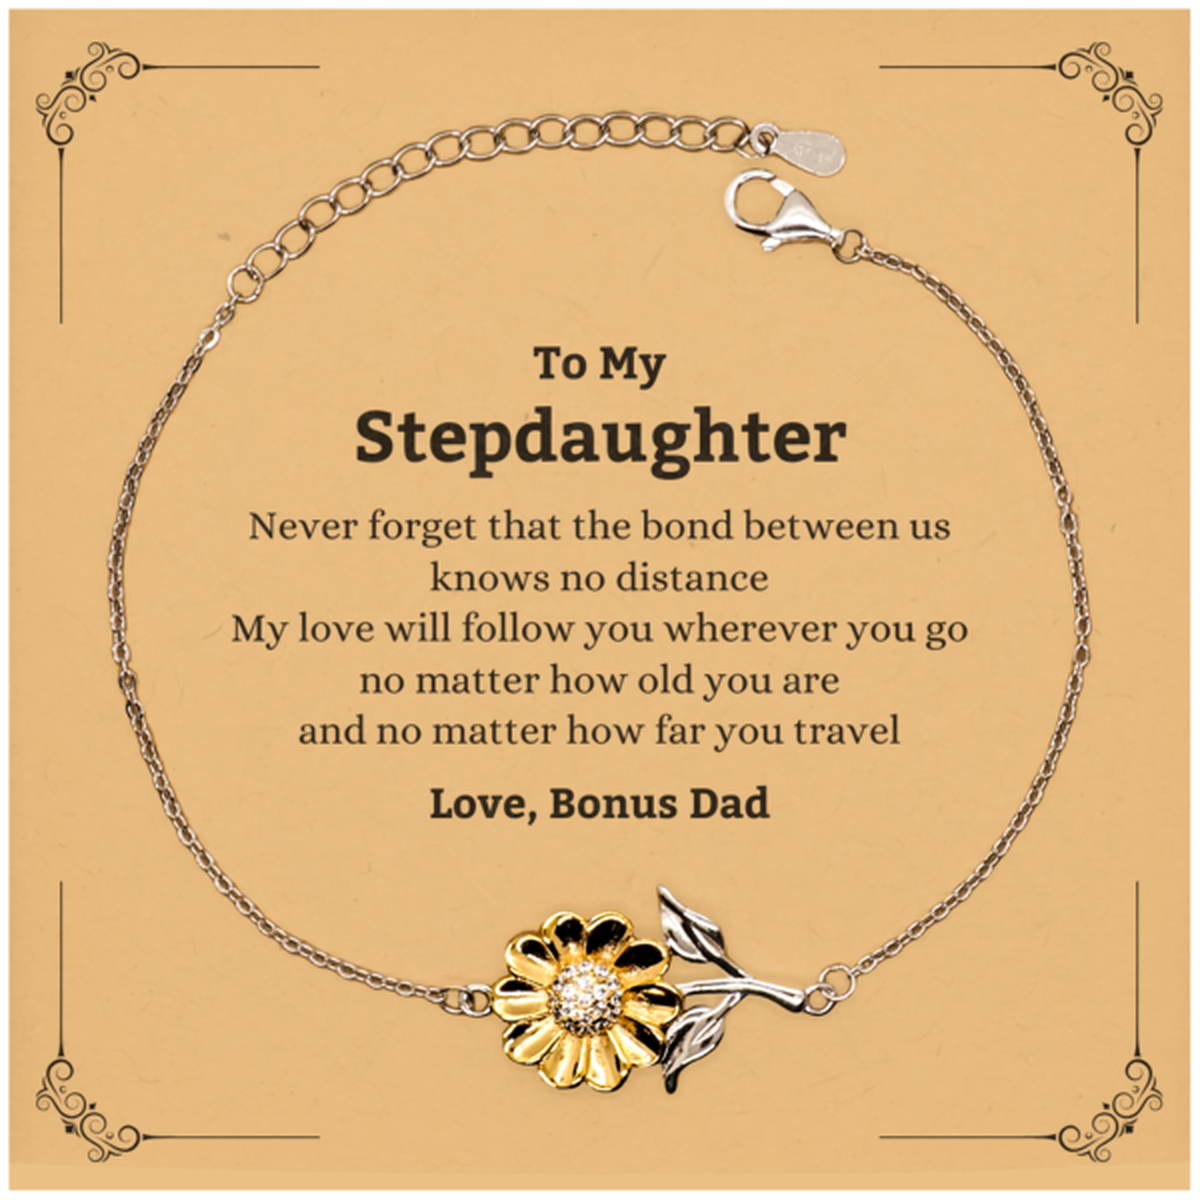 Stepdaughter Birthday Gifts from Bonus Dad, Adjustable Sunflower Bracelet for Stepdaughter Christmas Graduation Unique Gifts Stepdaughter Never forget that the bond between us knows no distance. Love, Bonus Dad